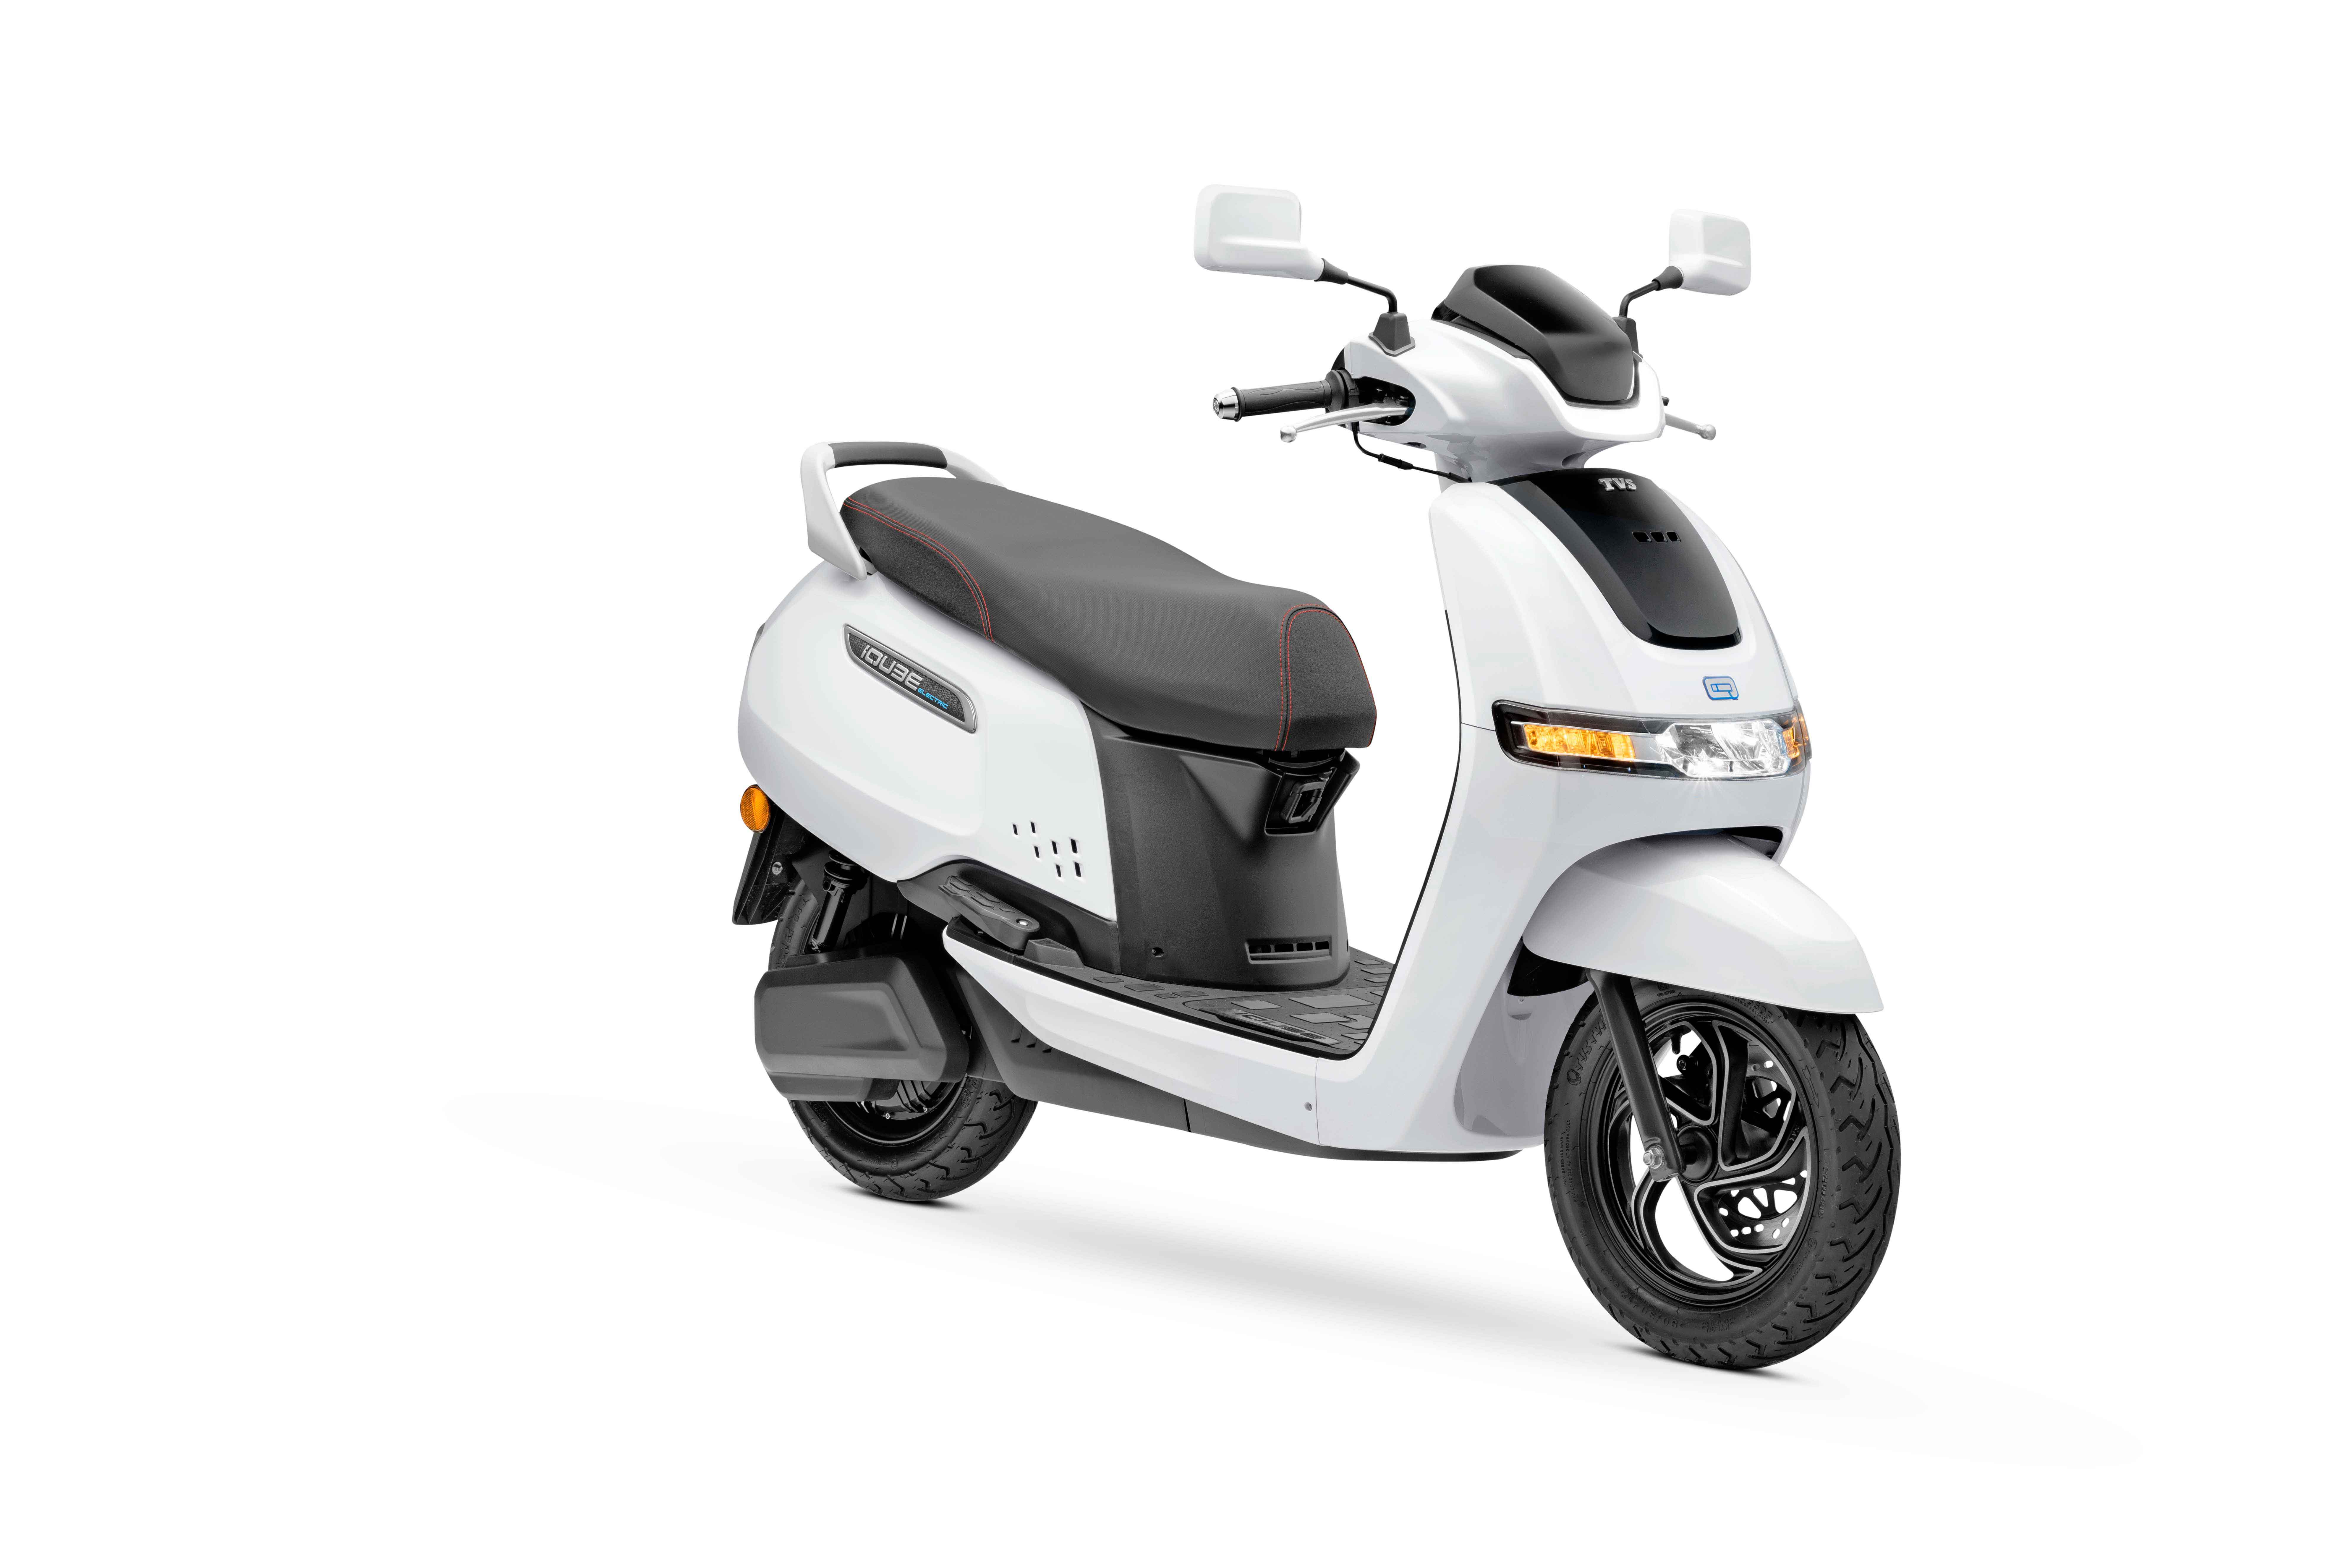 TVS-iQubeElectric, iQubeElectric, tvs-motor-company, electric-scooter, scooter 